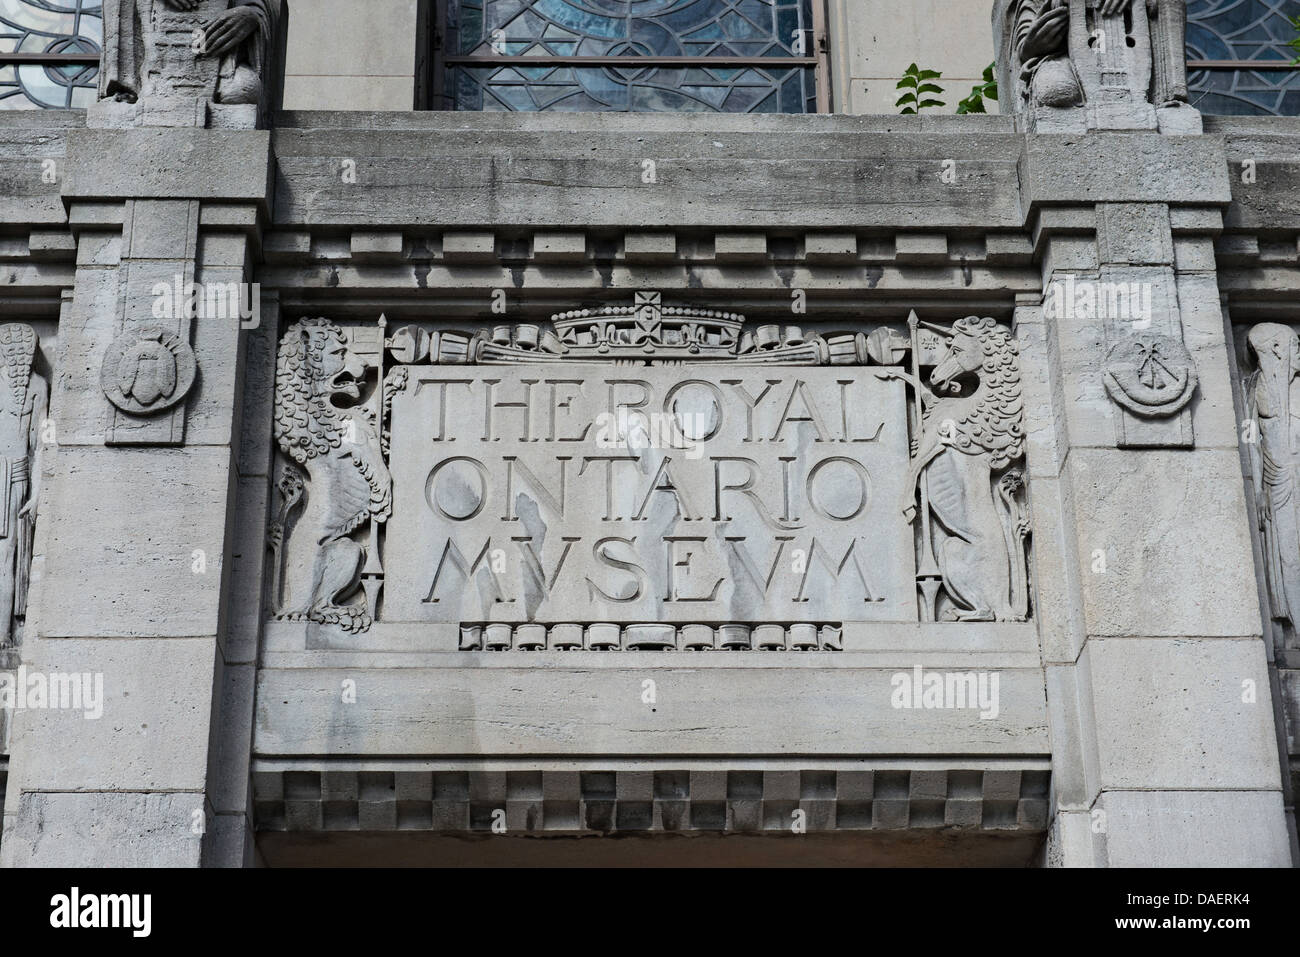 Royal Ontario Museum of world culture and natural history based in Toronto, Ontario Stock Photo